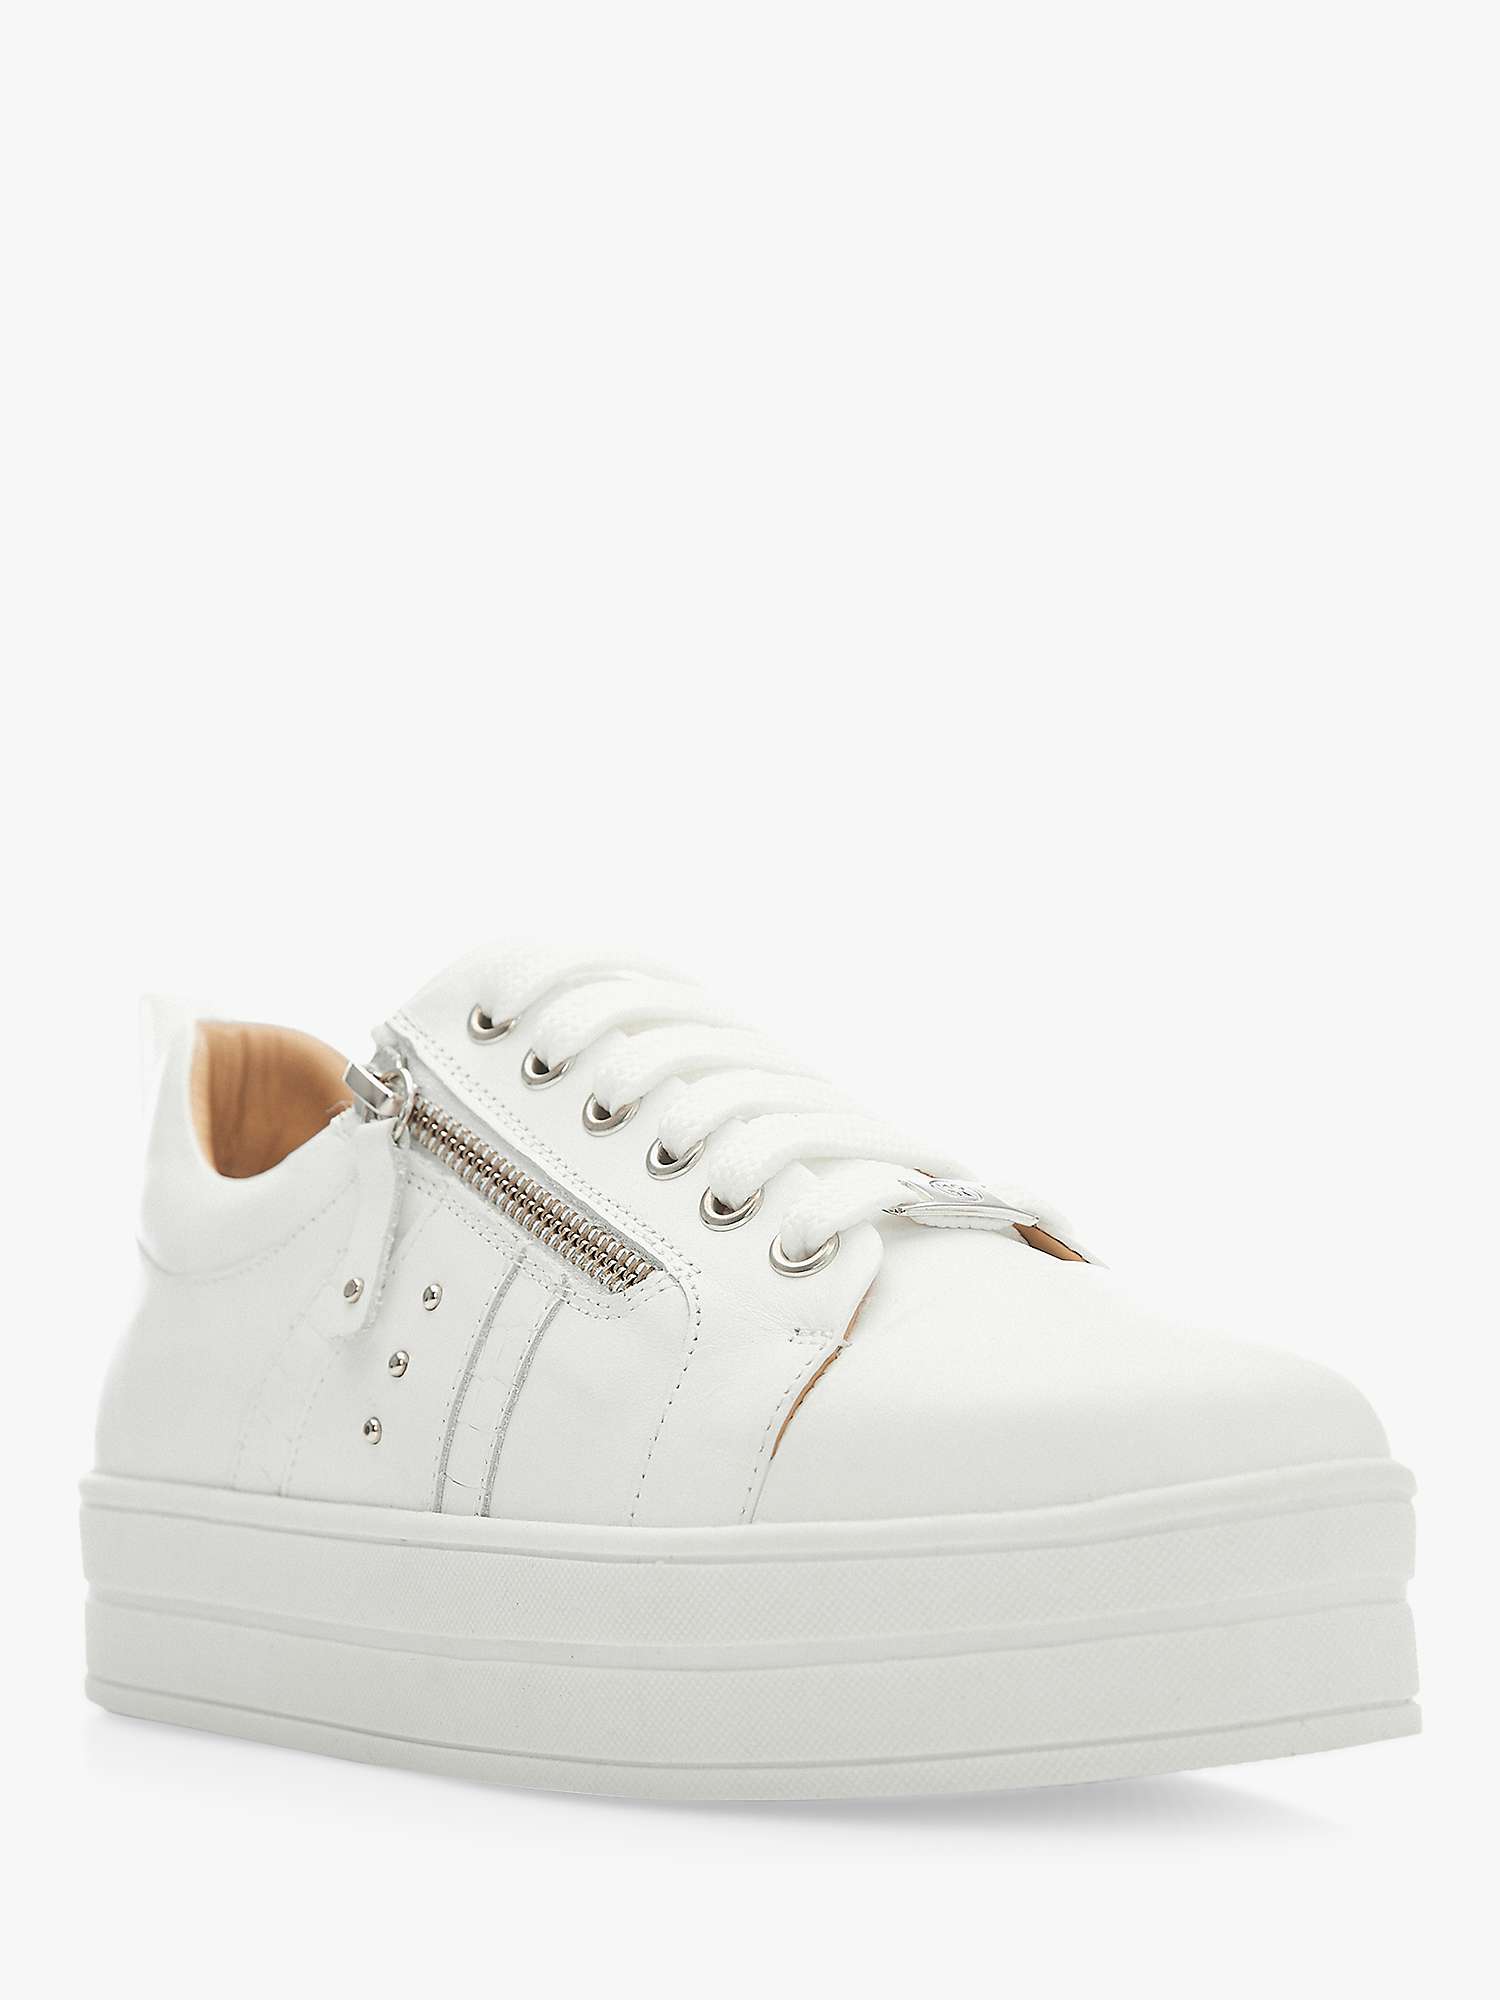 Moda in Pelle Arella Flatform Leather Trainers, White at John Lewis ...